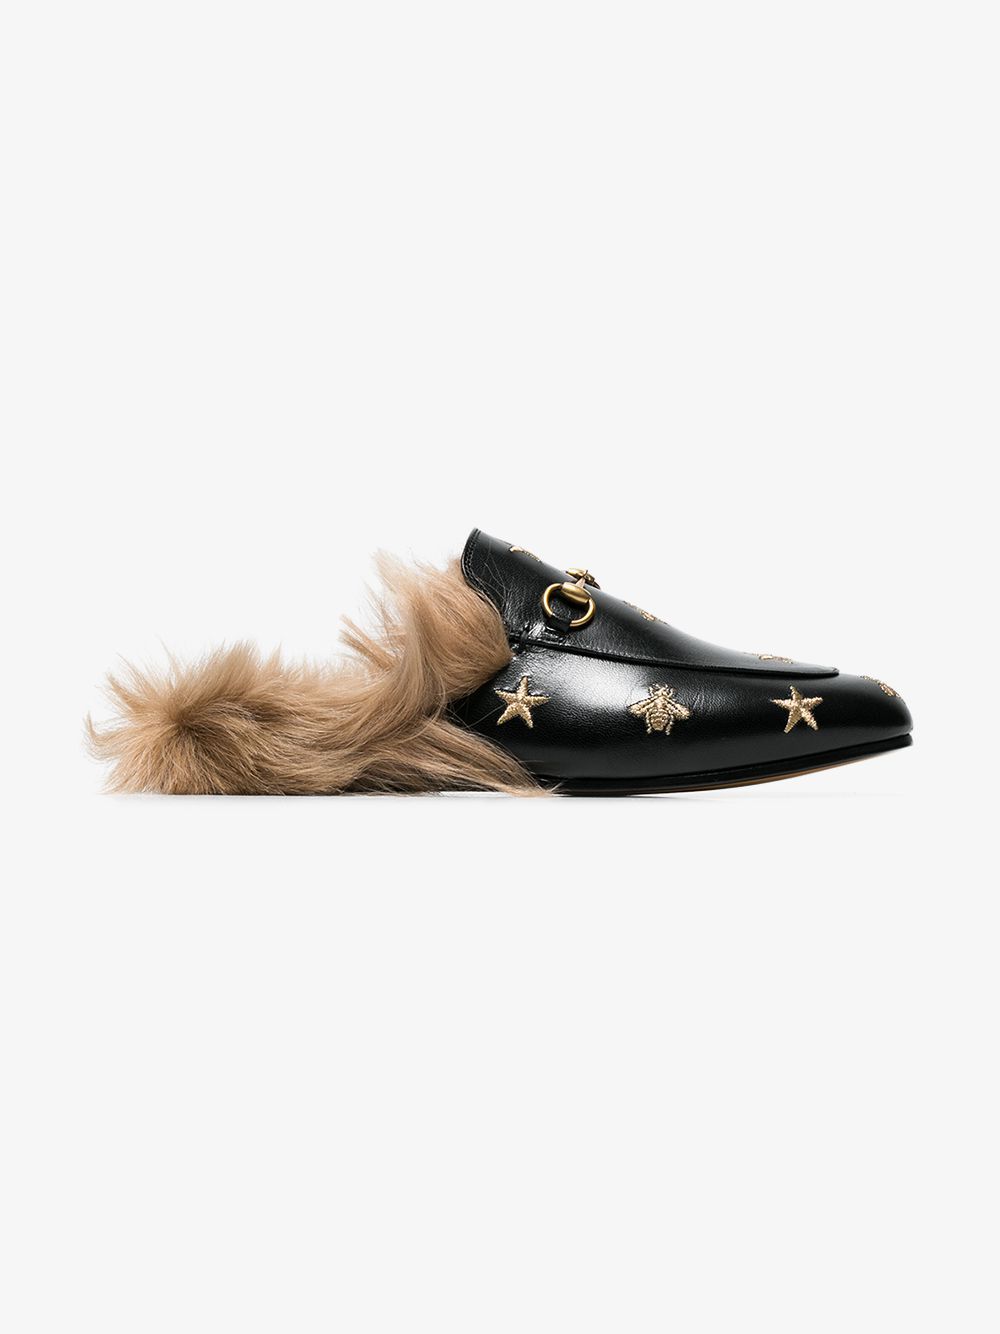 Gucci Princetown embroidered leather mules | Browns Fashion